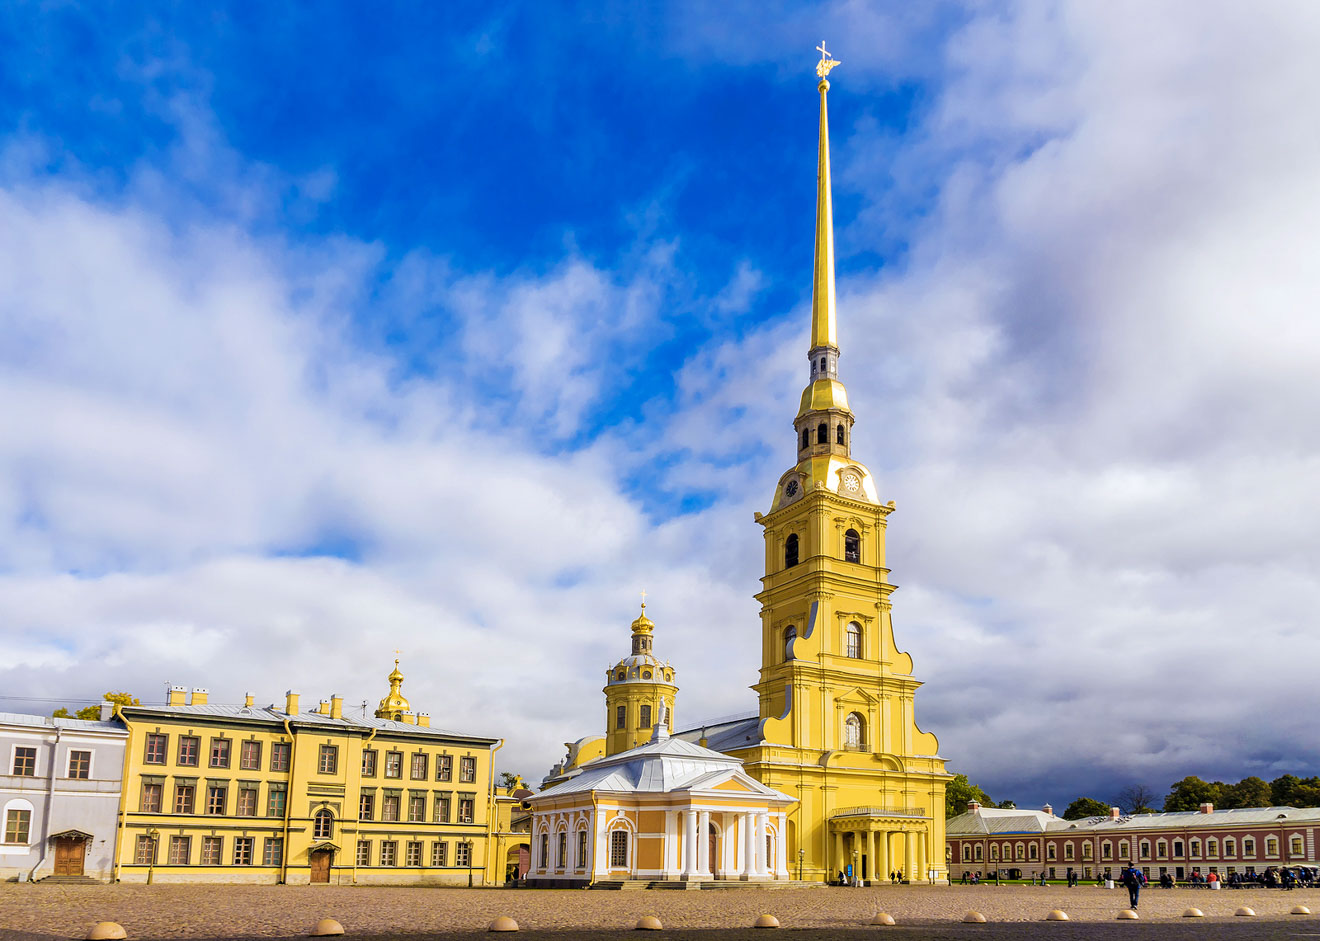 Top 11 Things To Do In Saint Petersburg Russia Peter and Paul Fortress